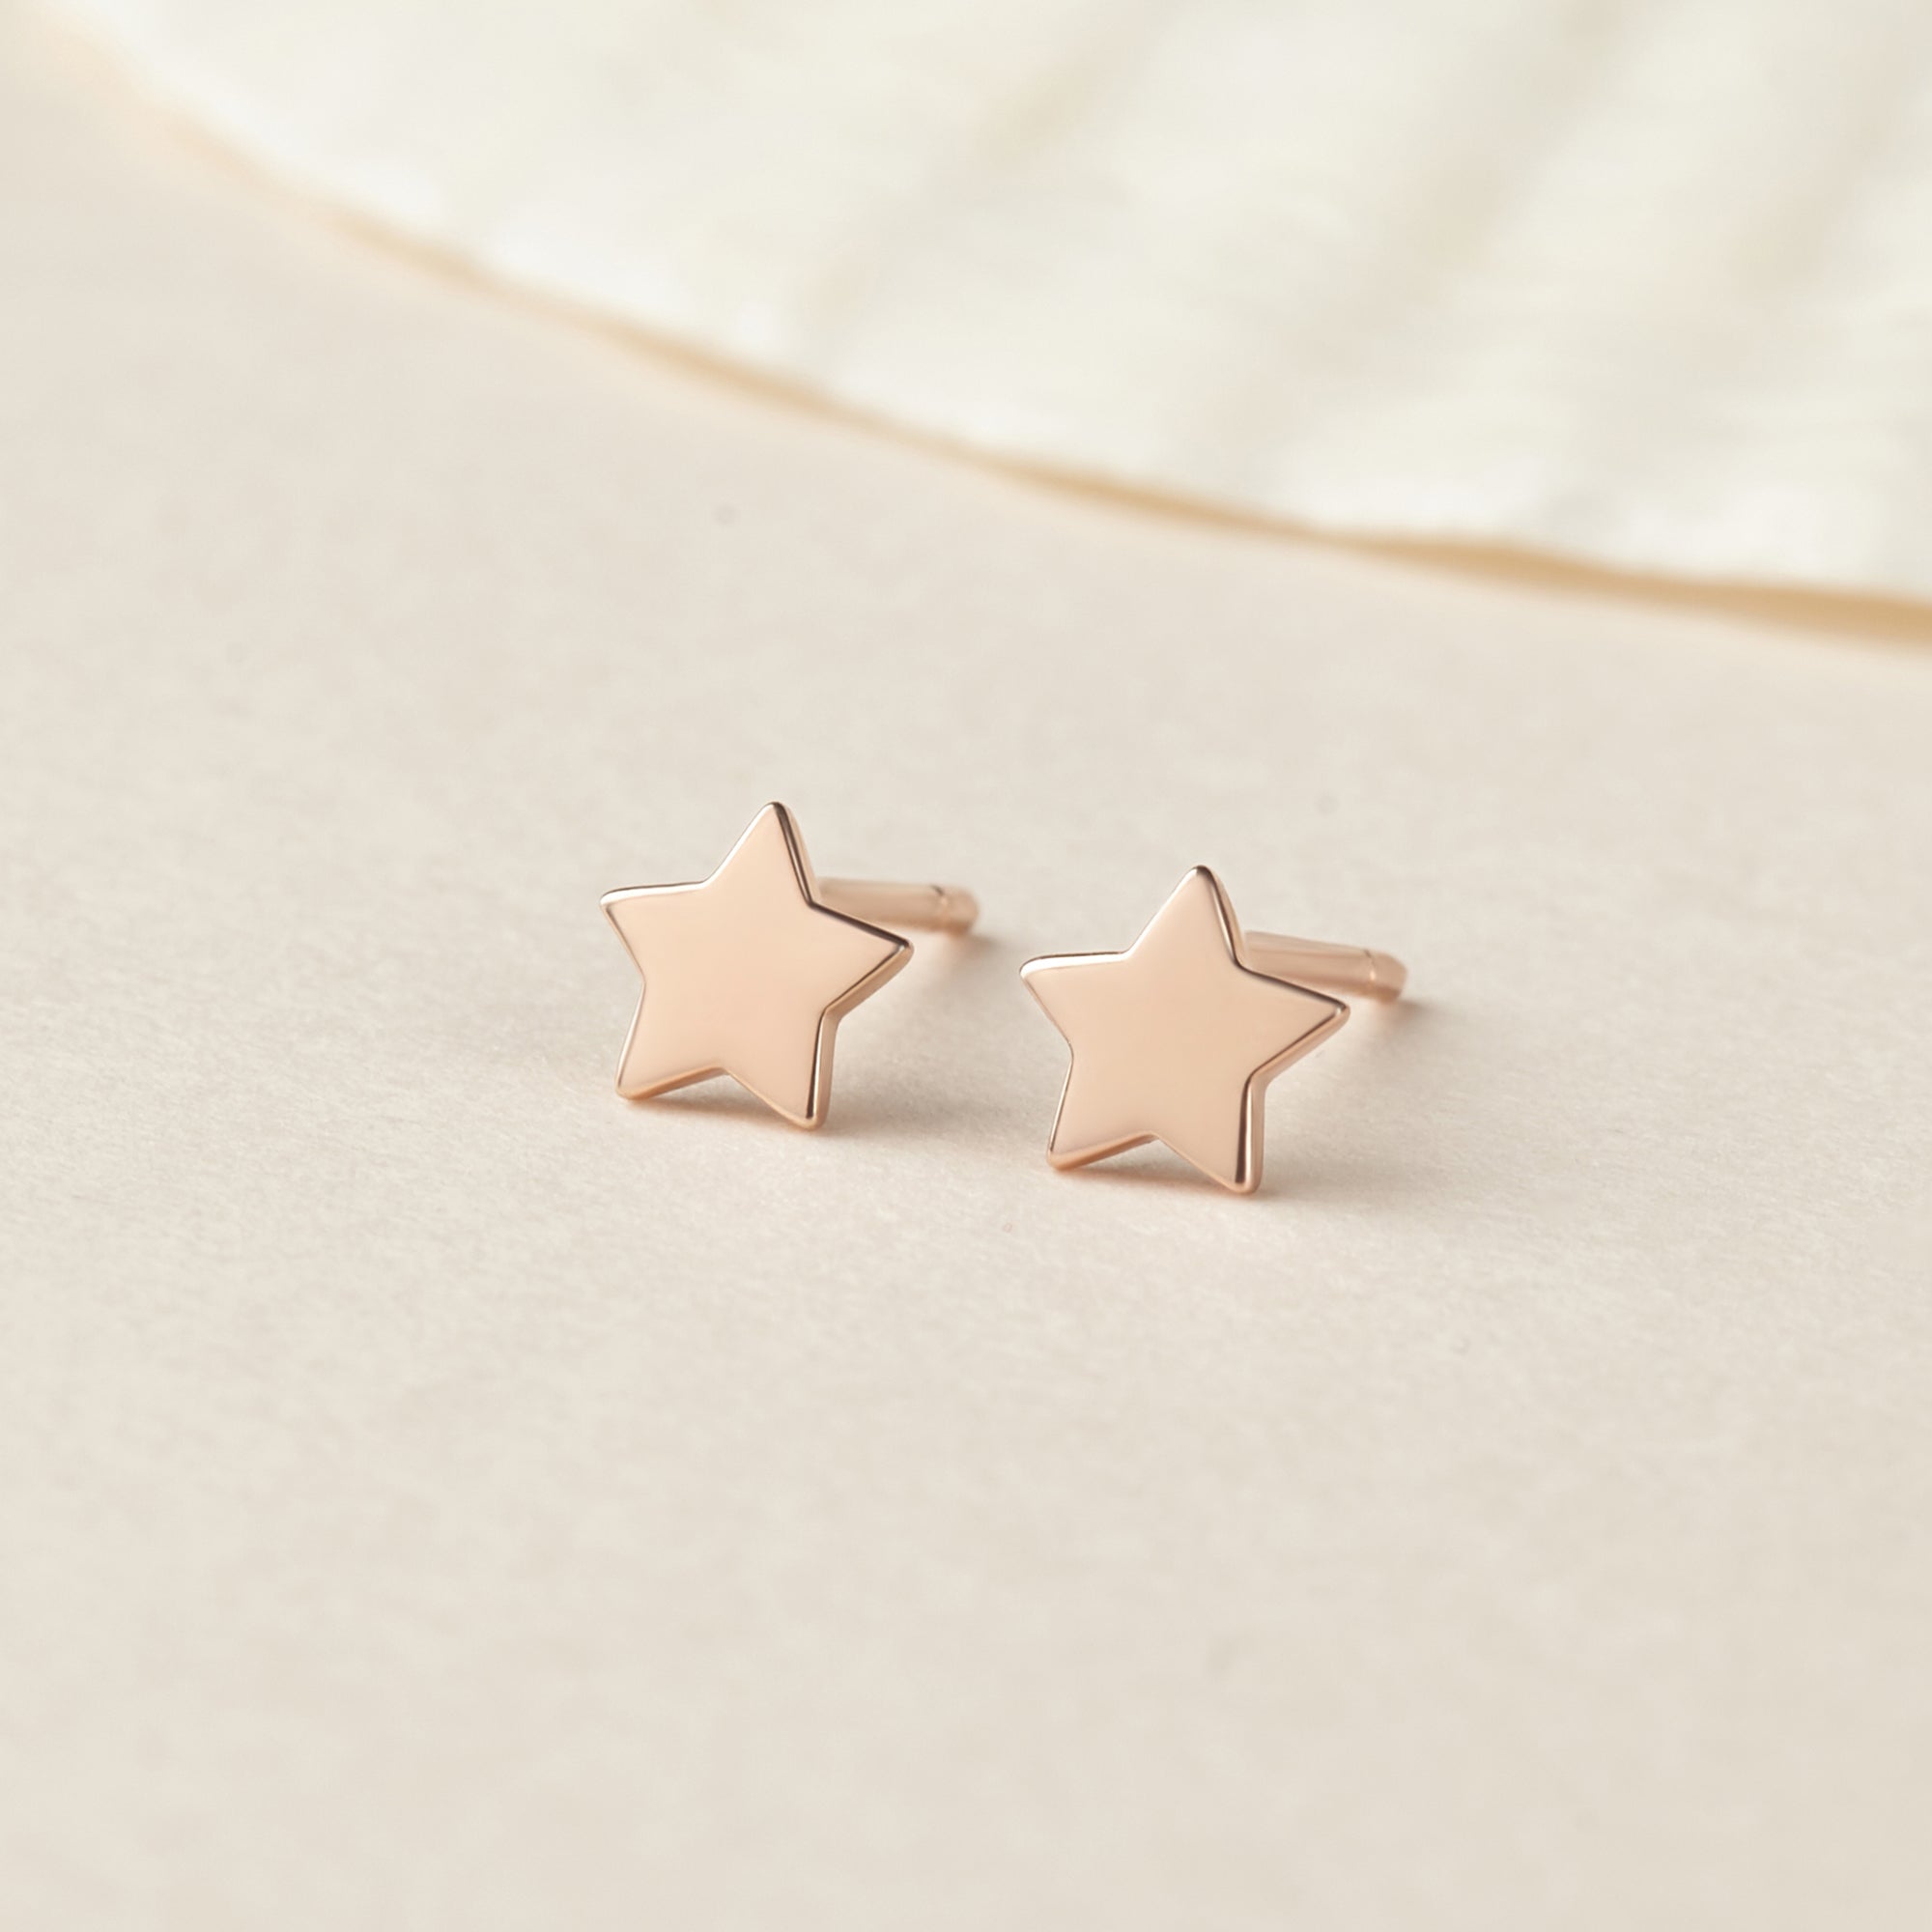 Hypoallergenic Star-shaped Stud Earrings in Sterling Silver - Available in Gold, Rose Gold, or Silver Finish - Earrings - Bijou Her -  -  - 